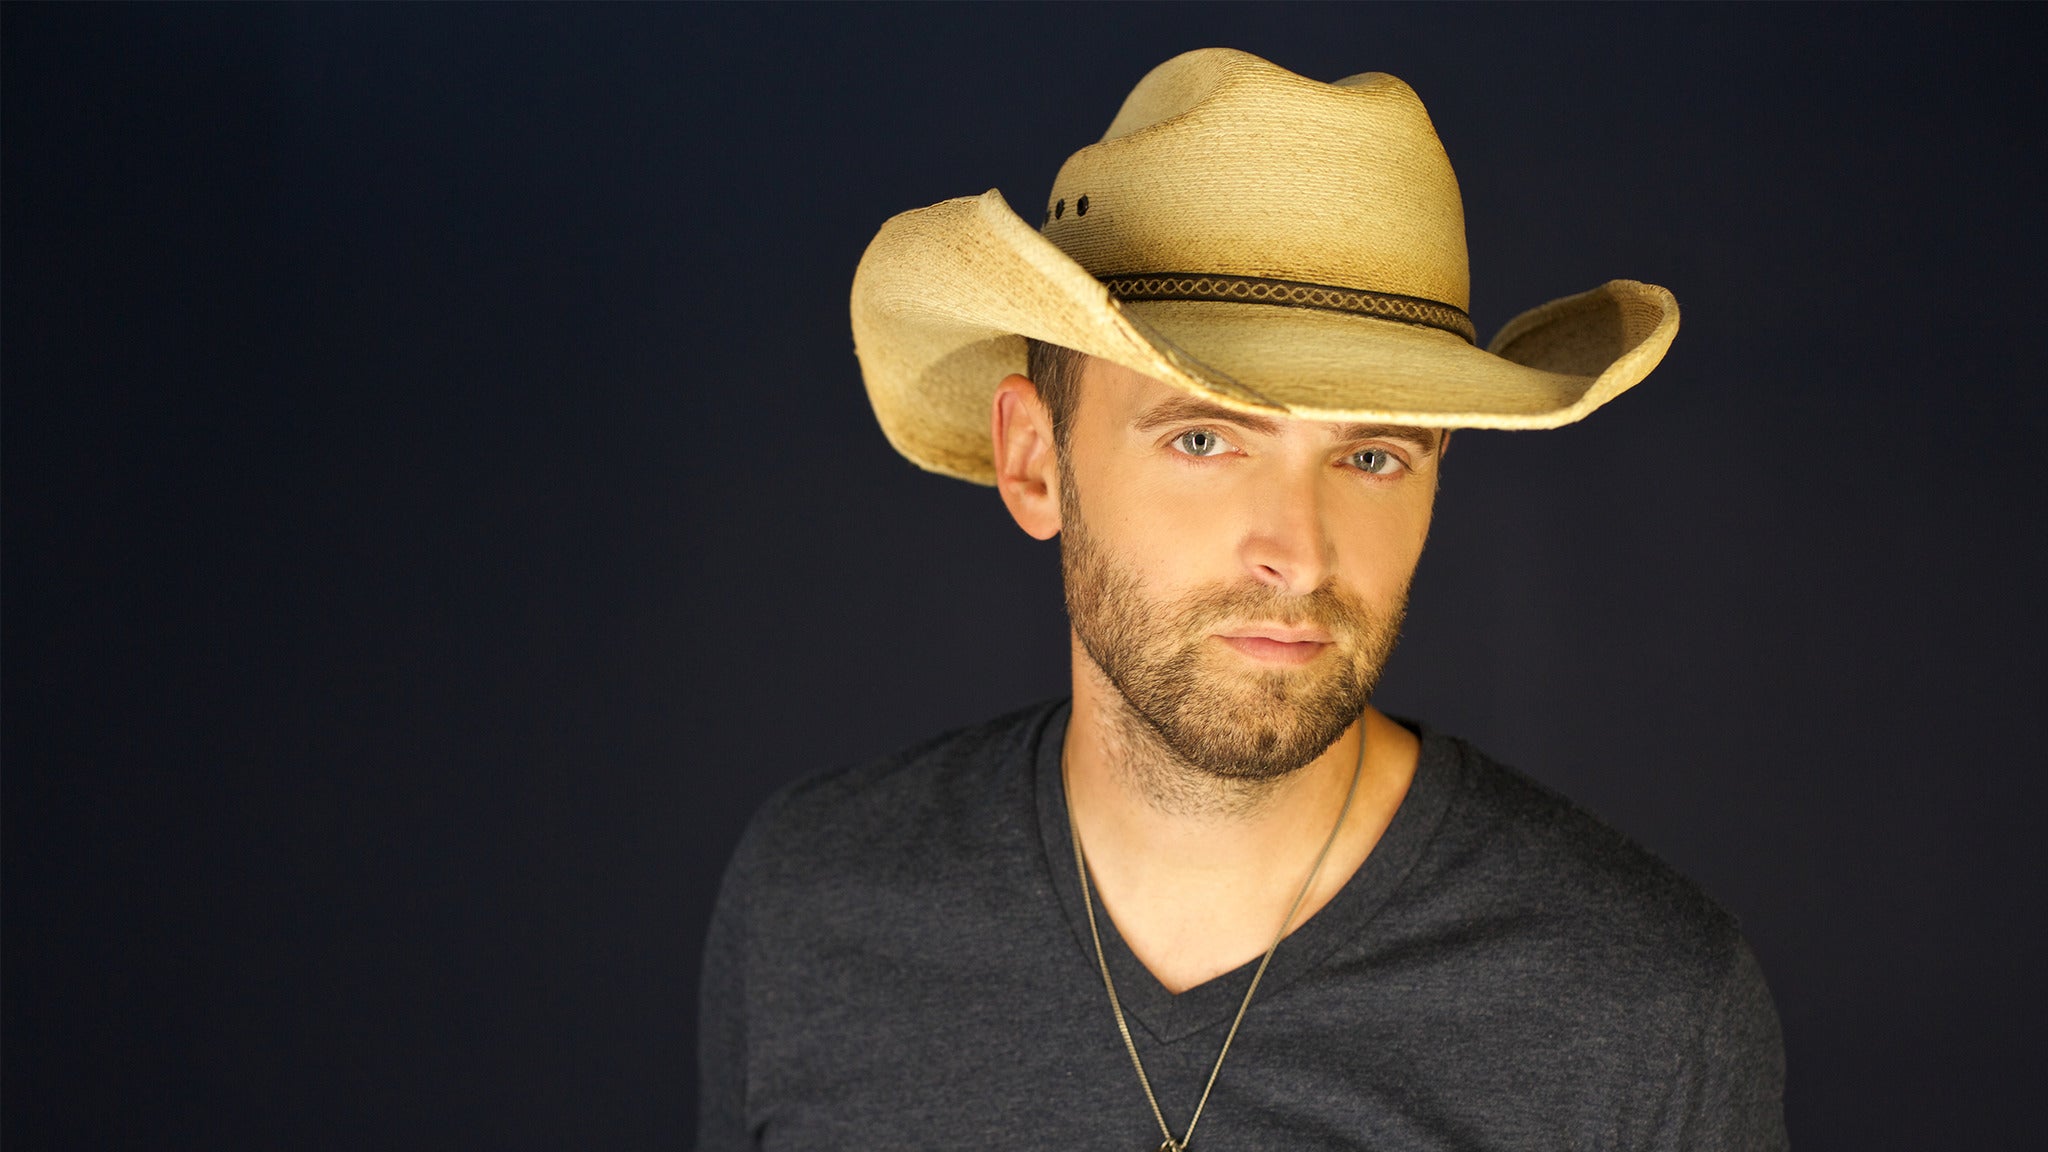 Image used with permission from Ticketmaster | Dean Brody tickets